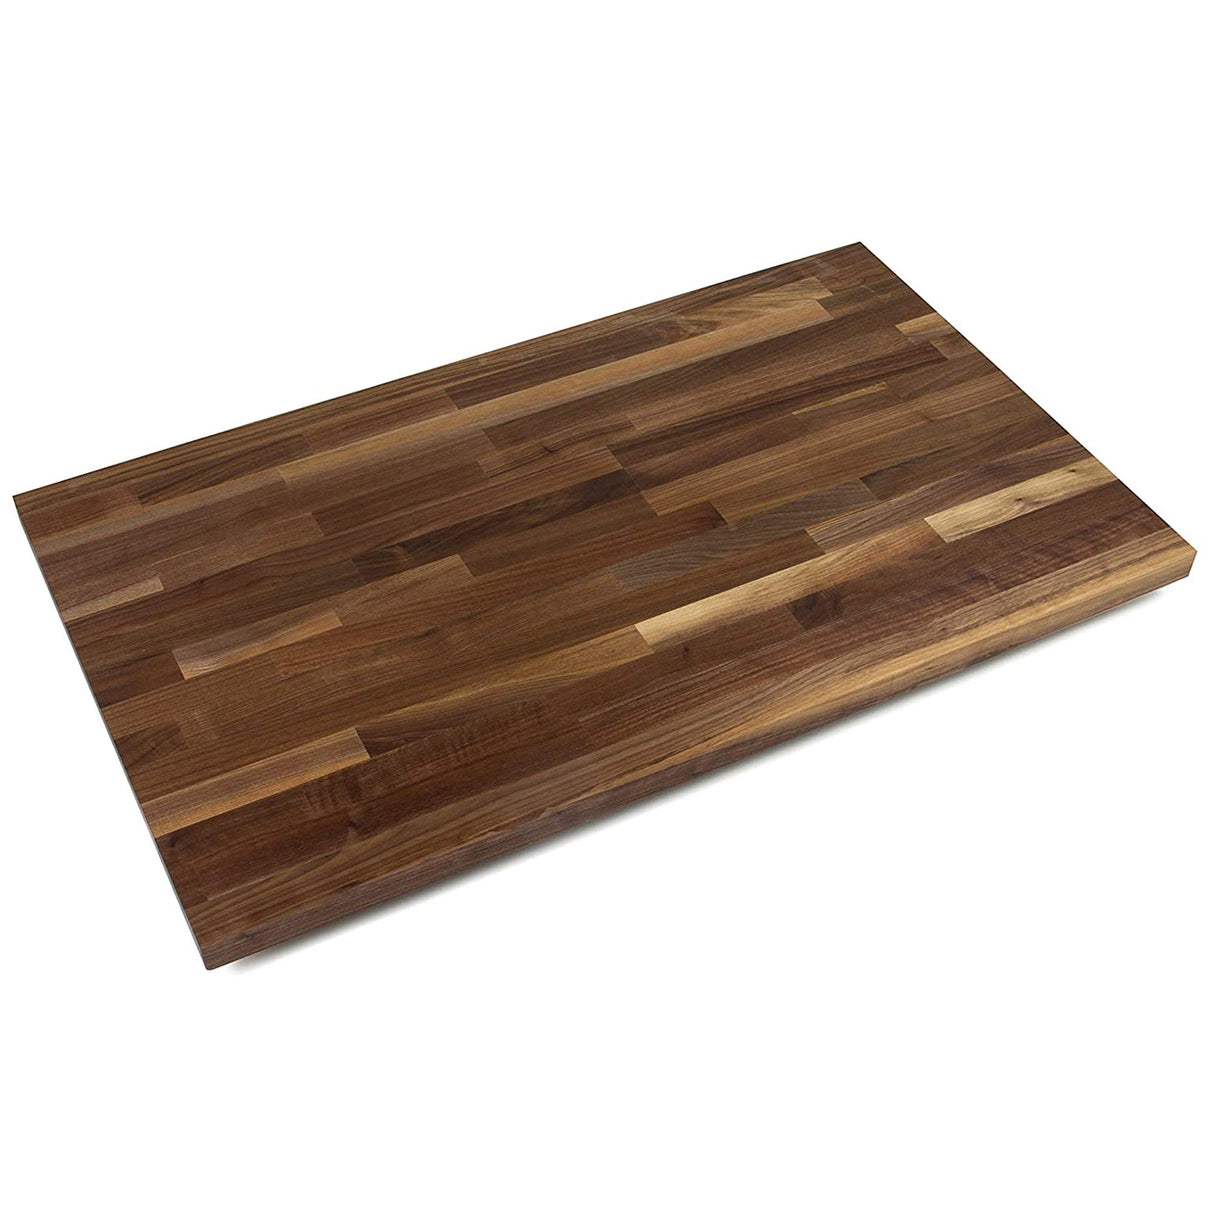 John Boos WALKCT-BL6038-O 60 x 38 1.5 inch Rectangular Blended Solid Walnut Butcher Block Cutting Board with Natural Oil Finish for Kitchen Counters or Island Tops